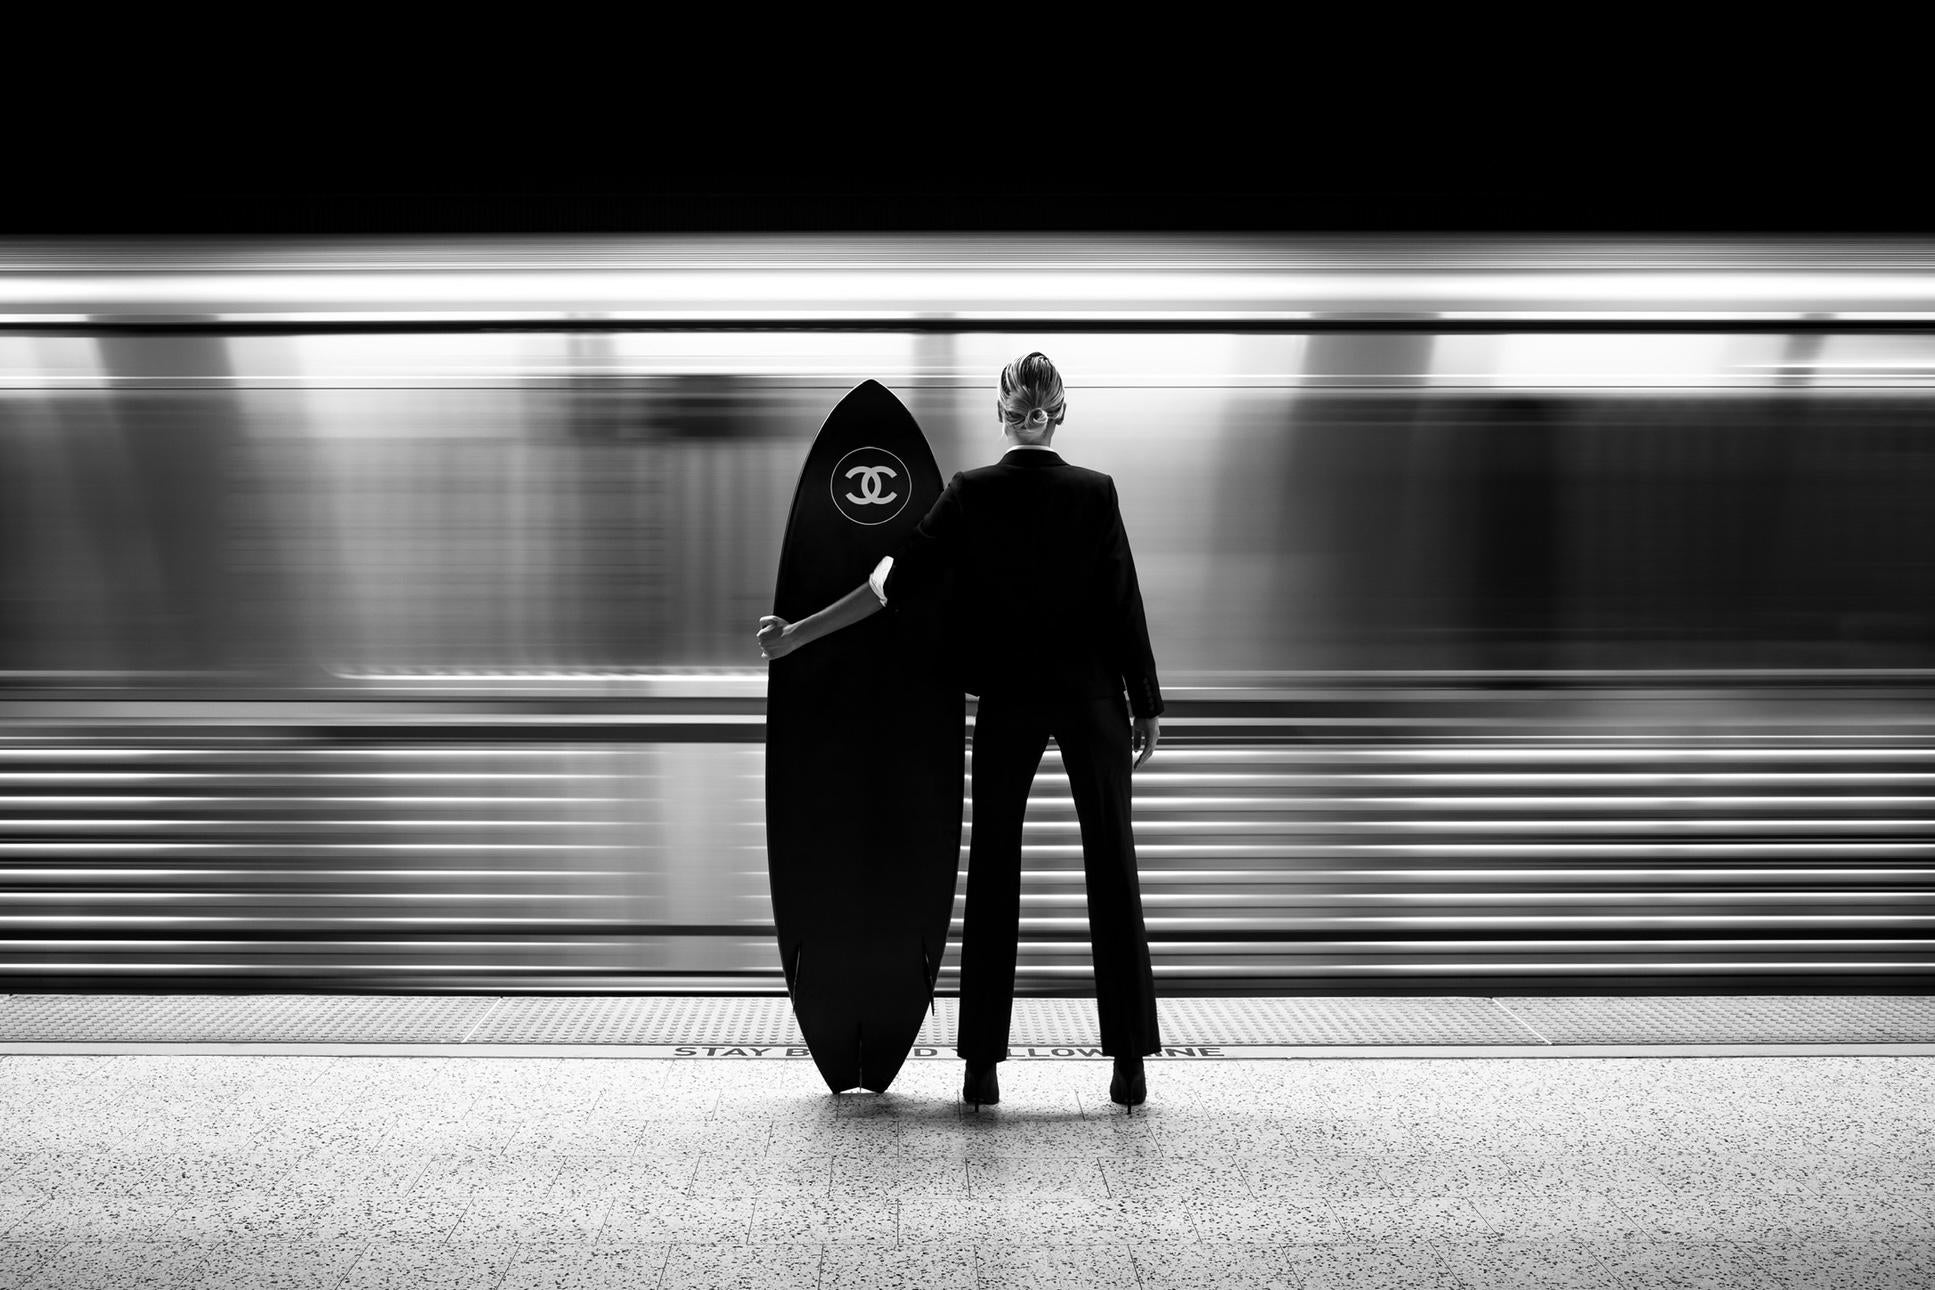 "Subway Surfer" Photography 40" x 60" inch Edition 2/3 by Brendan North

ships rolled in a tube

ABOUT:
Brendan North is a fine art photographer based in Los Angeles. Having built a social media presence of nearly 1 million people, Brendan is one of